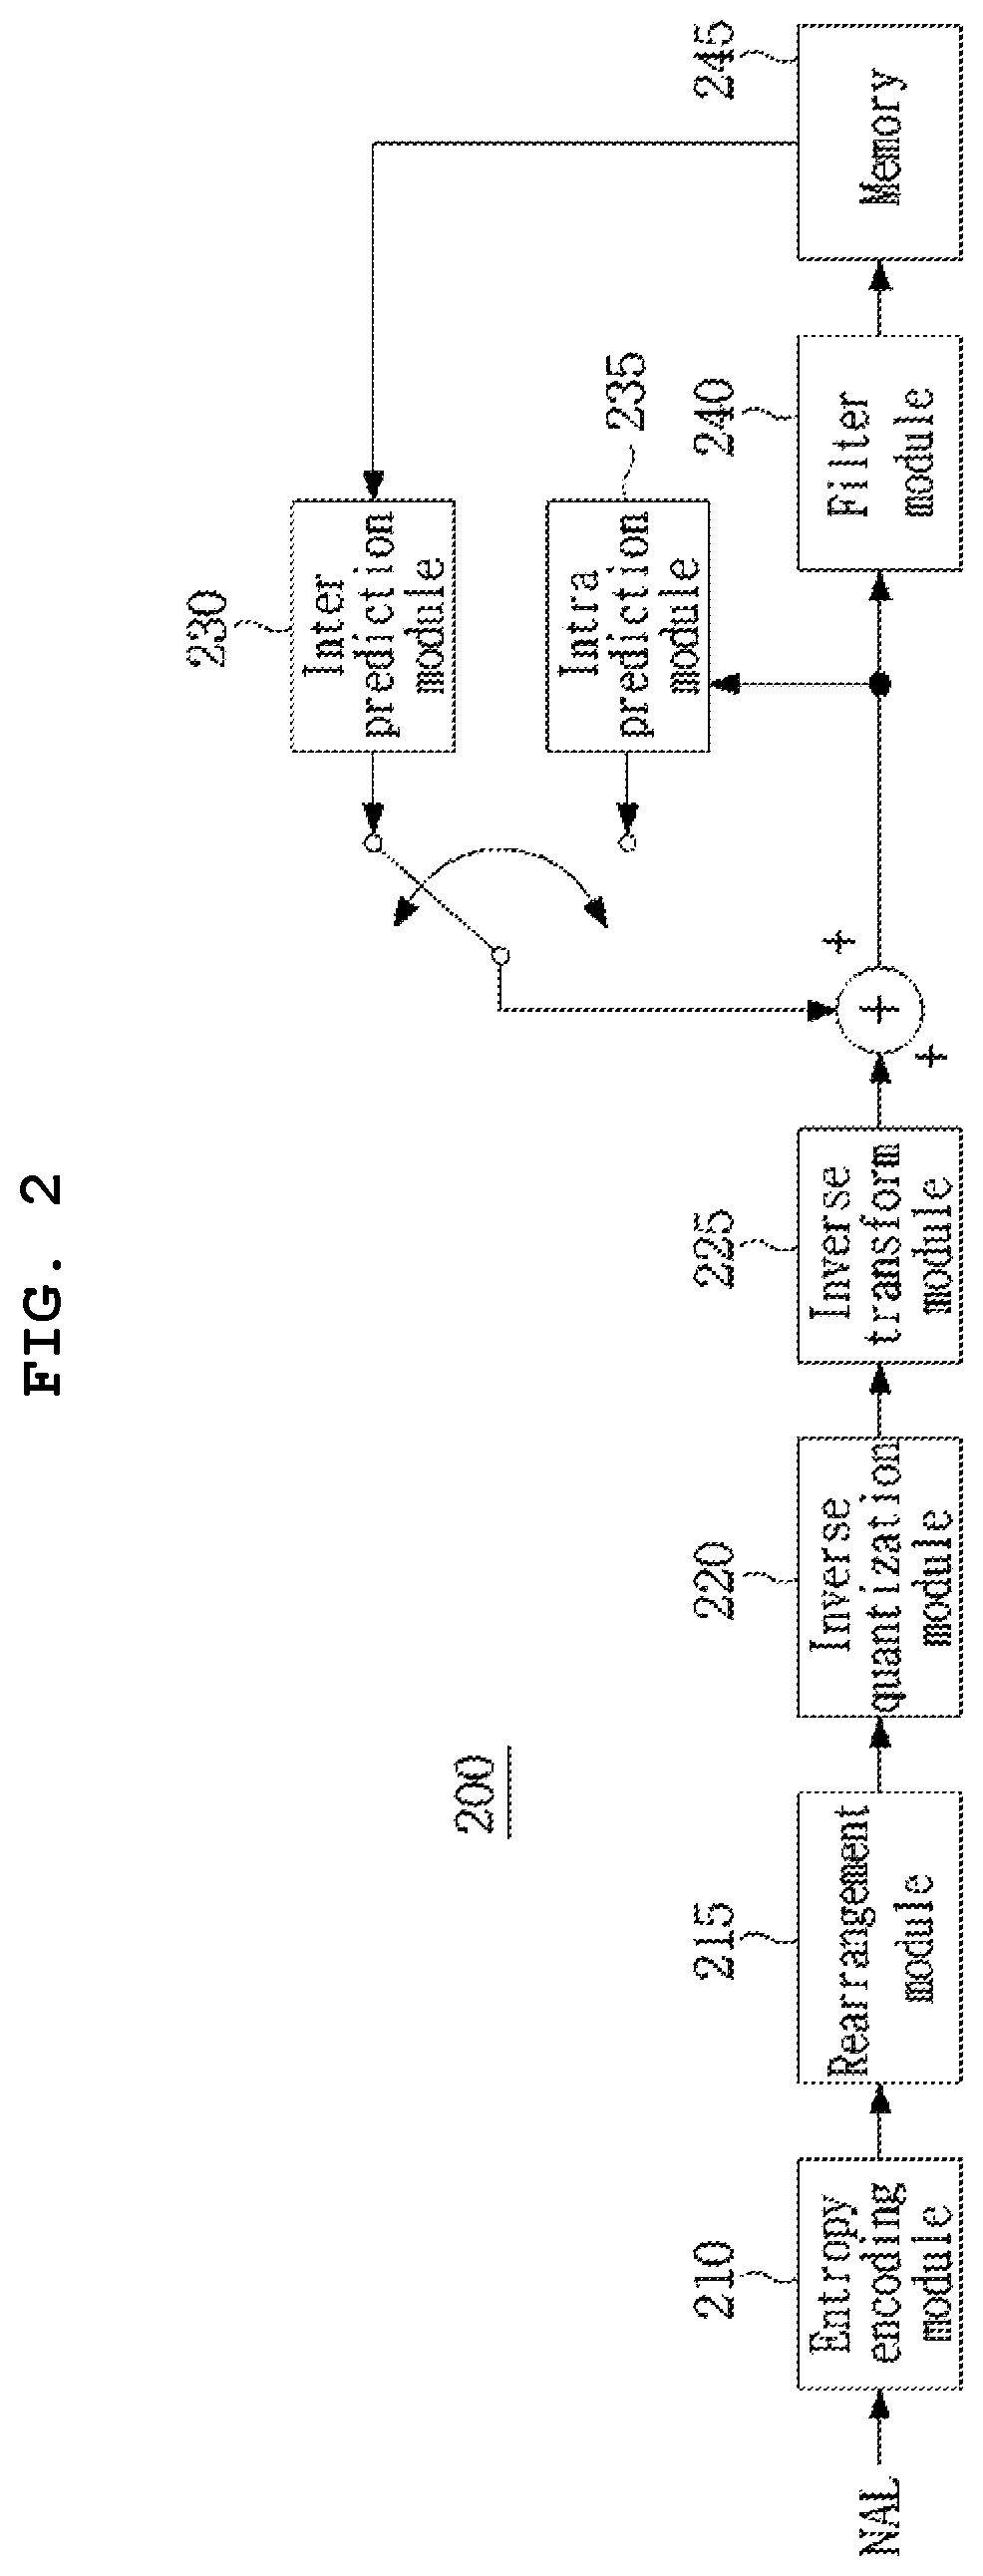 Method and apparatus for processing video signal